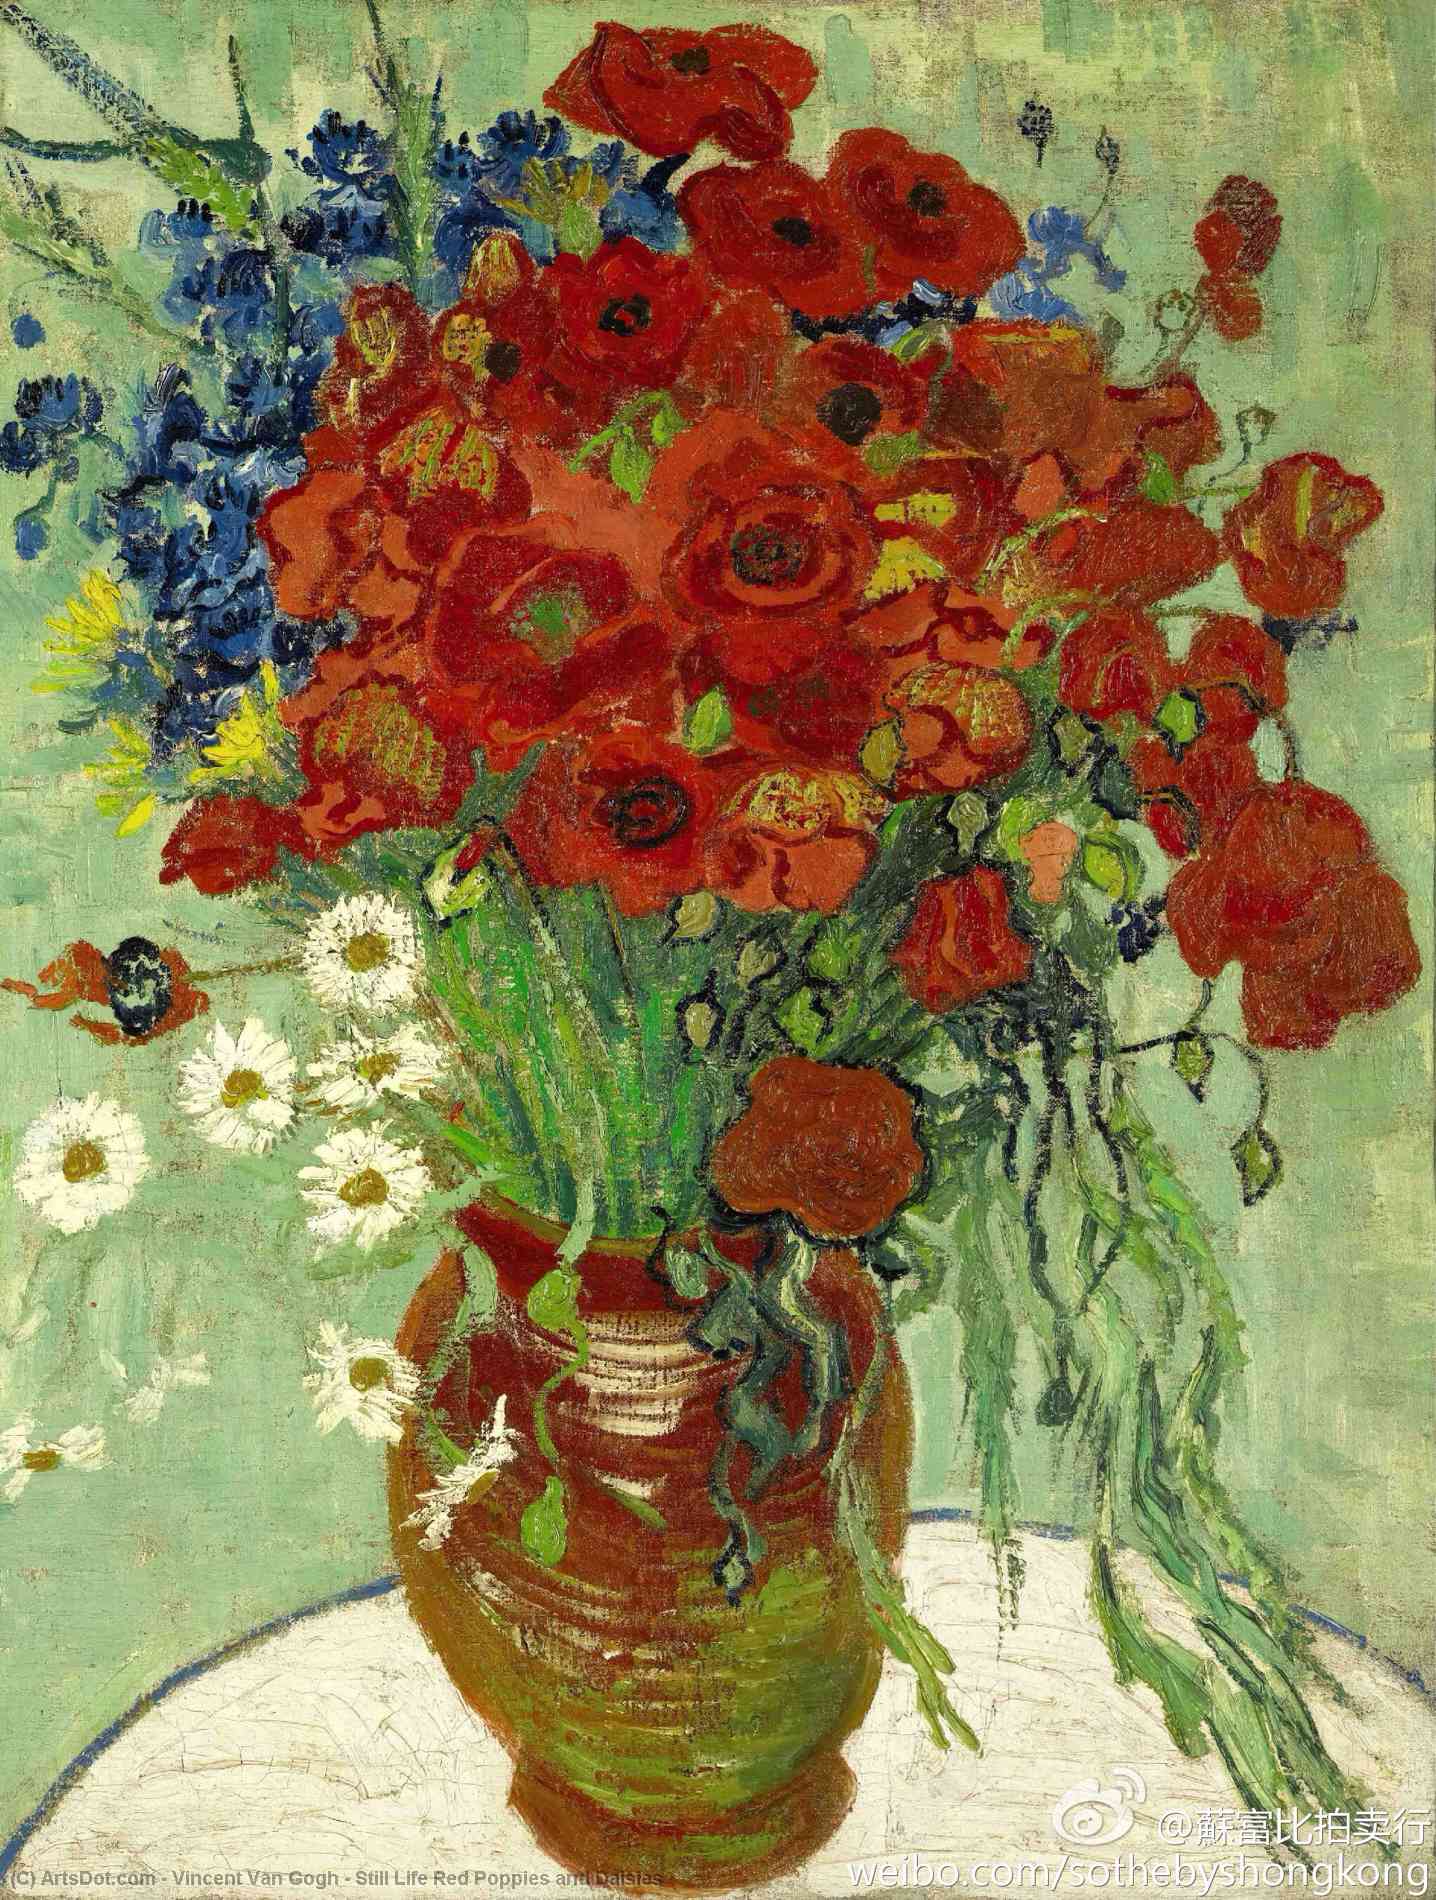 WikiOO.org - Encyclopedia of Fine Arts - Maleri, Artwork Vincent Van Gogh - Still Life Red Poppies and Daisies